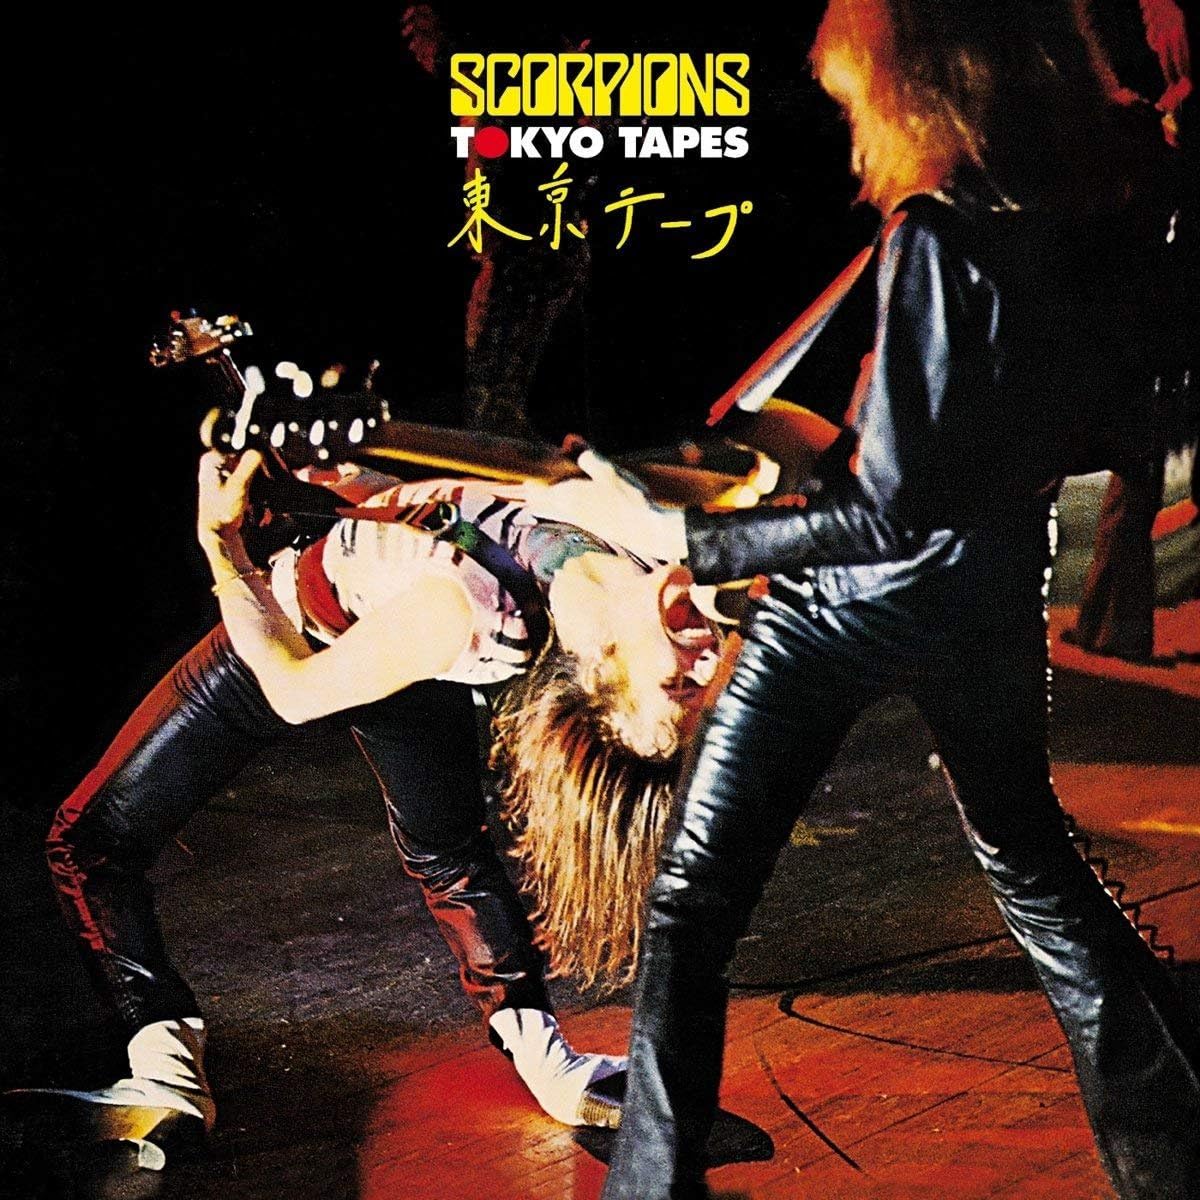 Tokyo Tapes | Scorpions